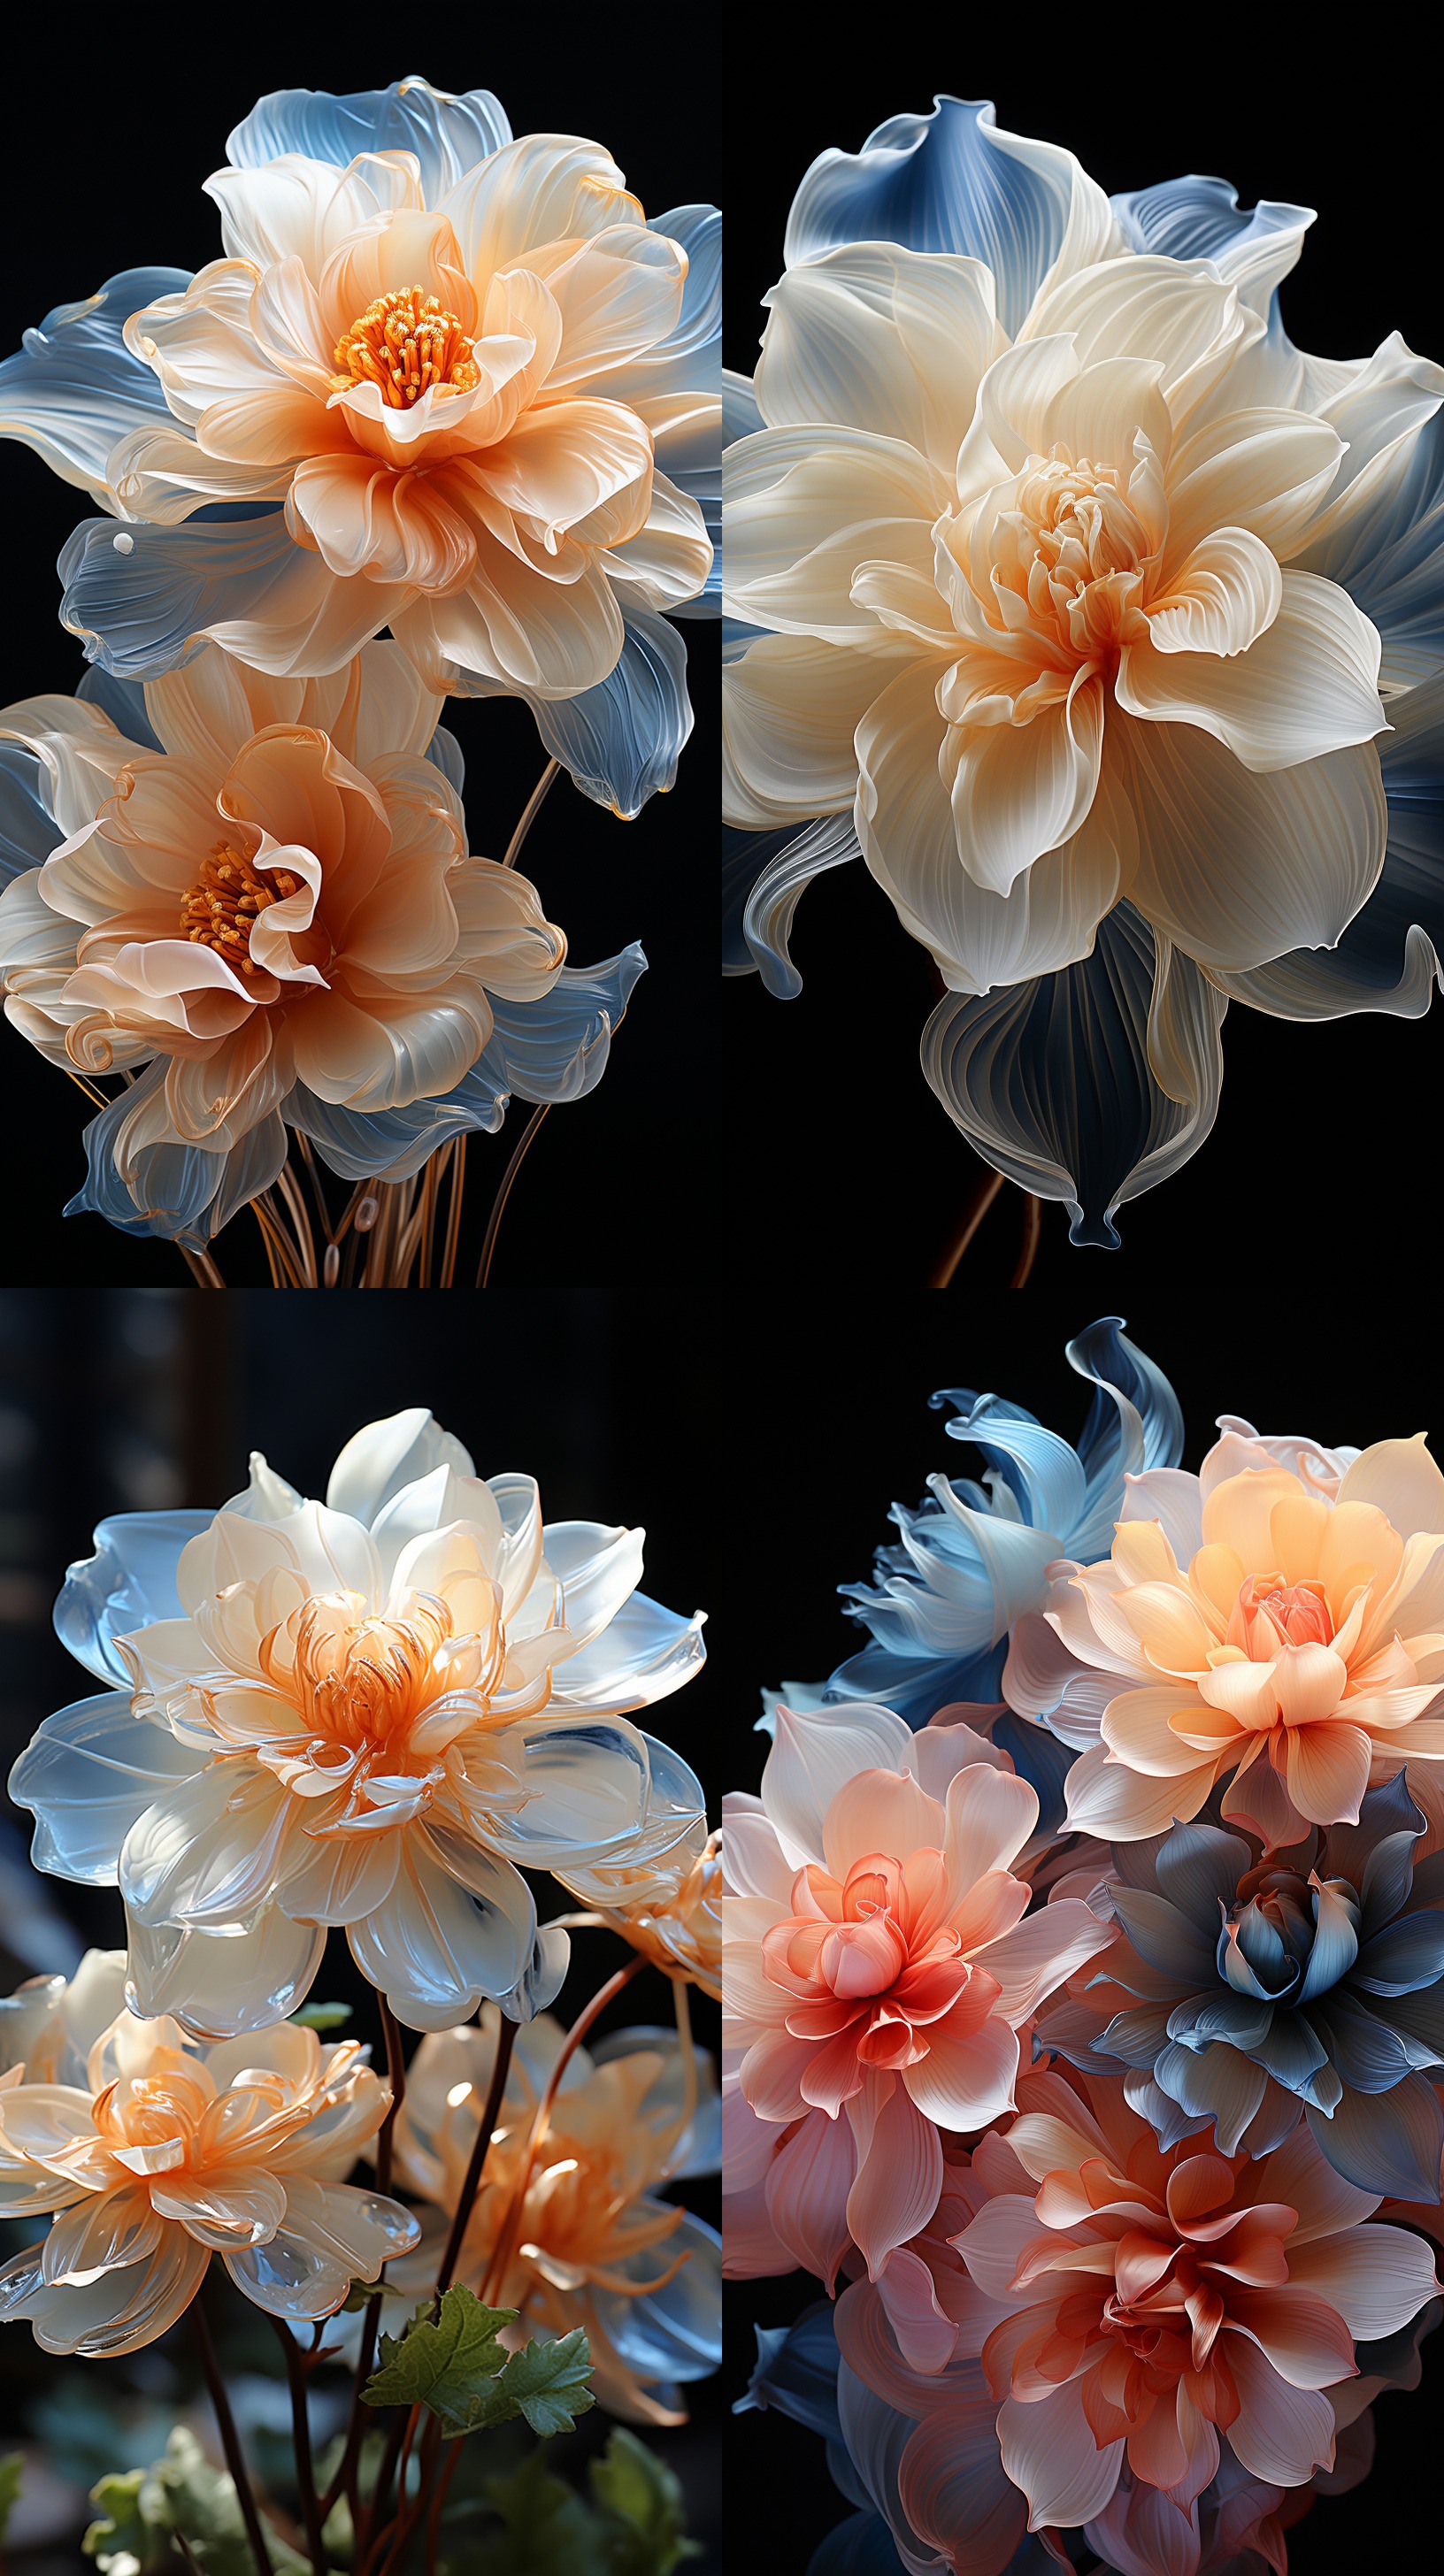 nicepsd_A_flower_all_petals_are_like_a_flower_folded_out_of_the_a931a94d-391e-4c6b-8dd0-7af720e14ffb